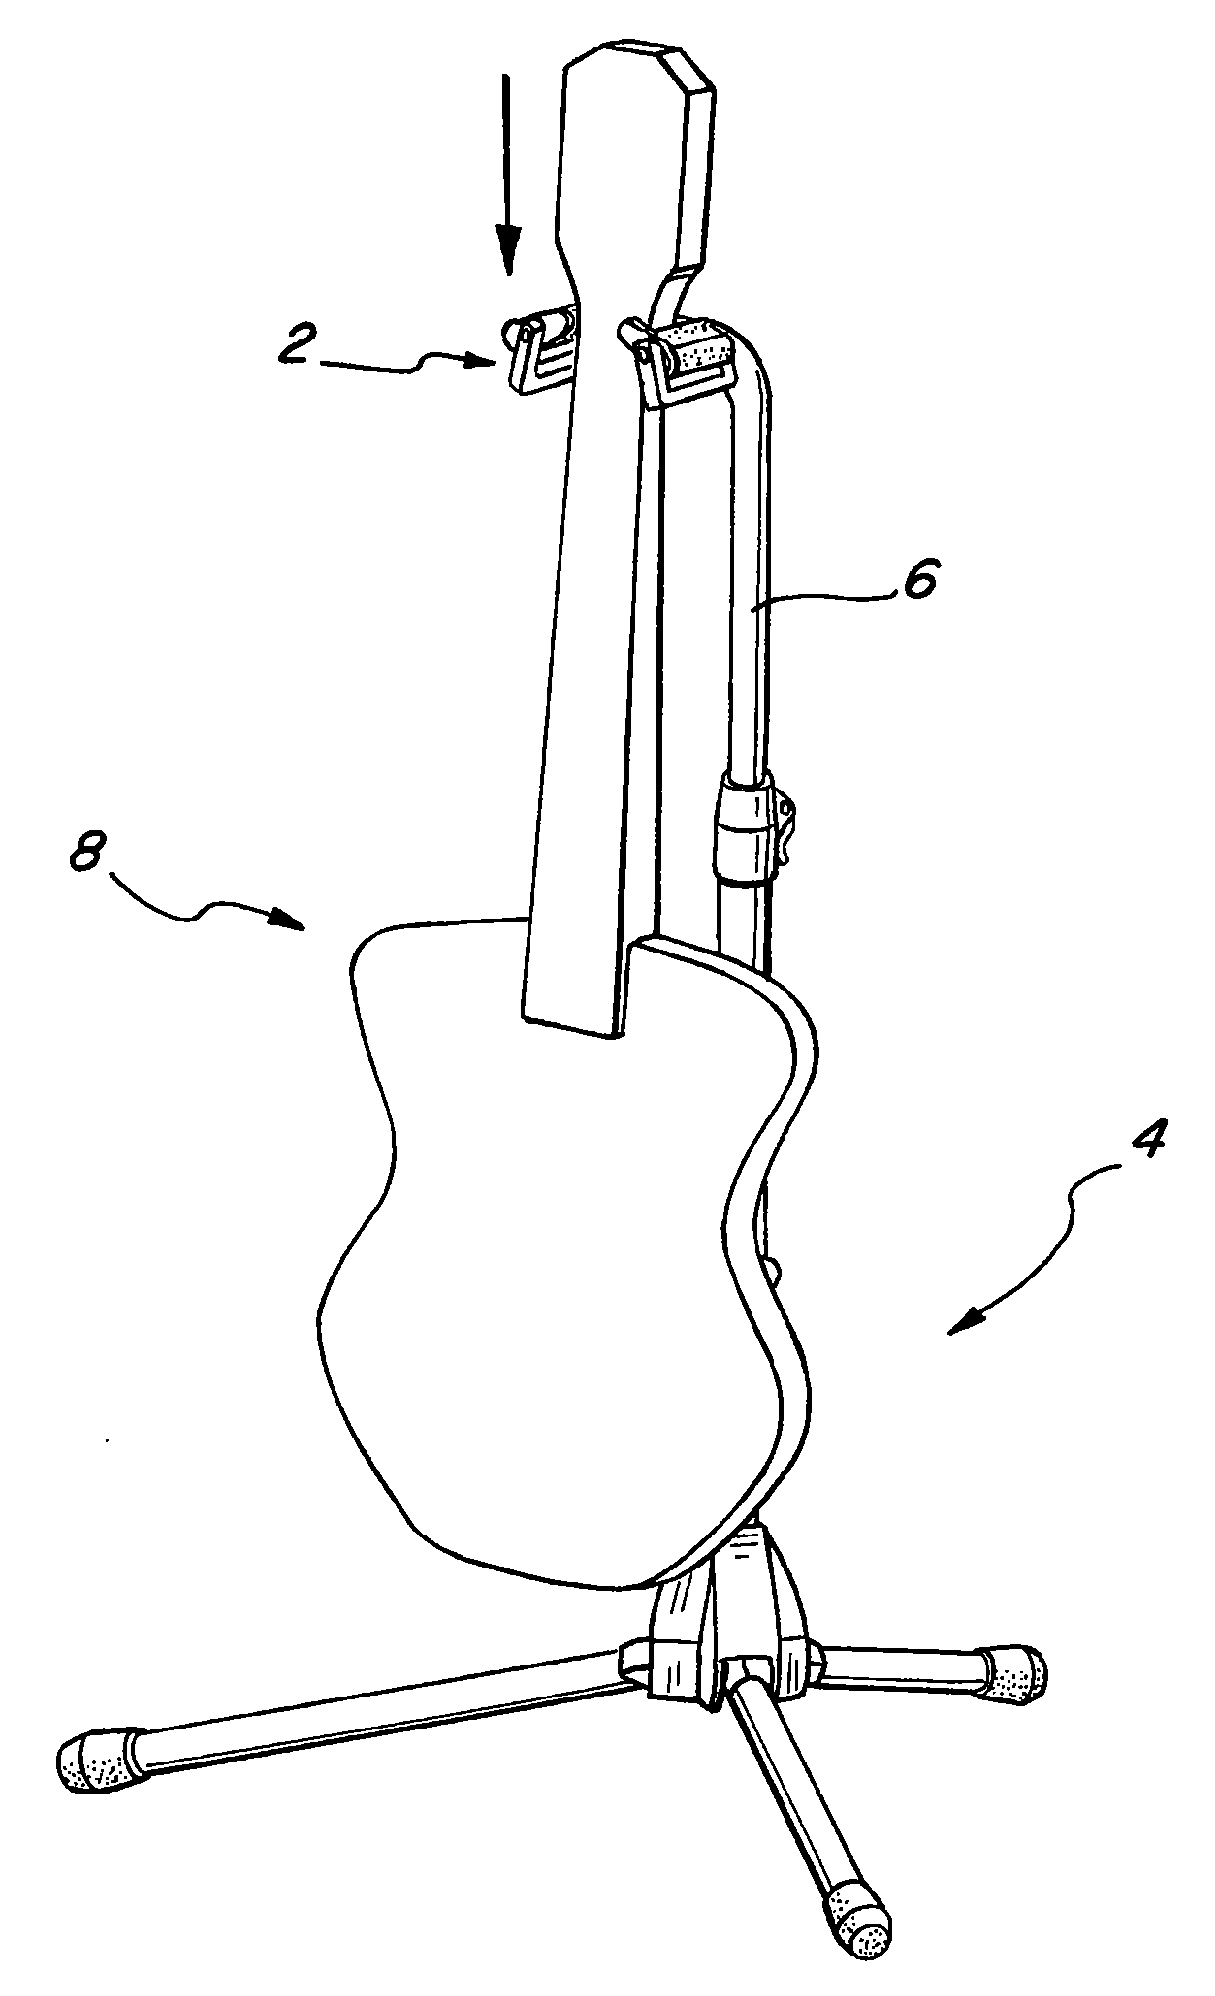 Locking device for retaining a musical instrument